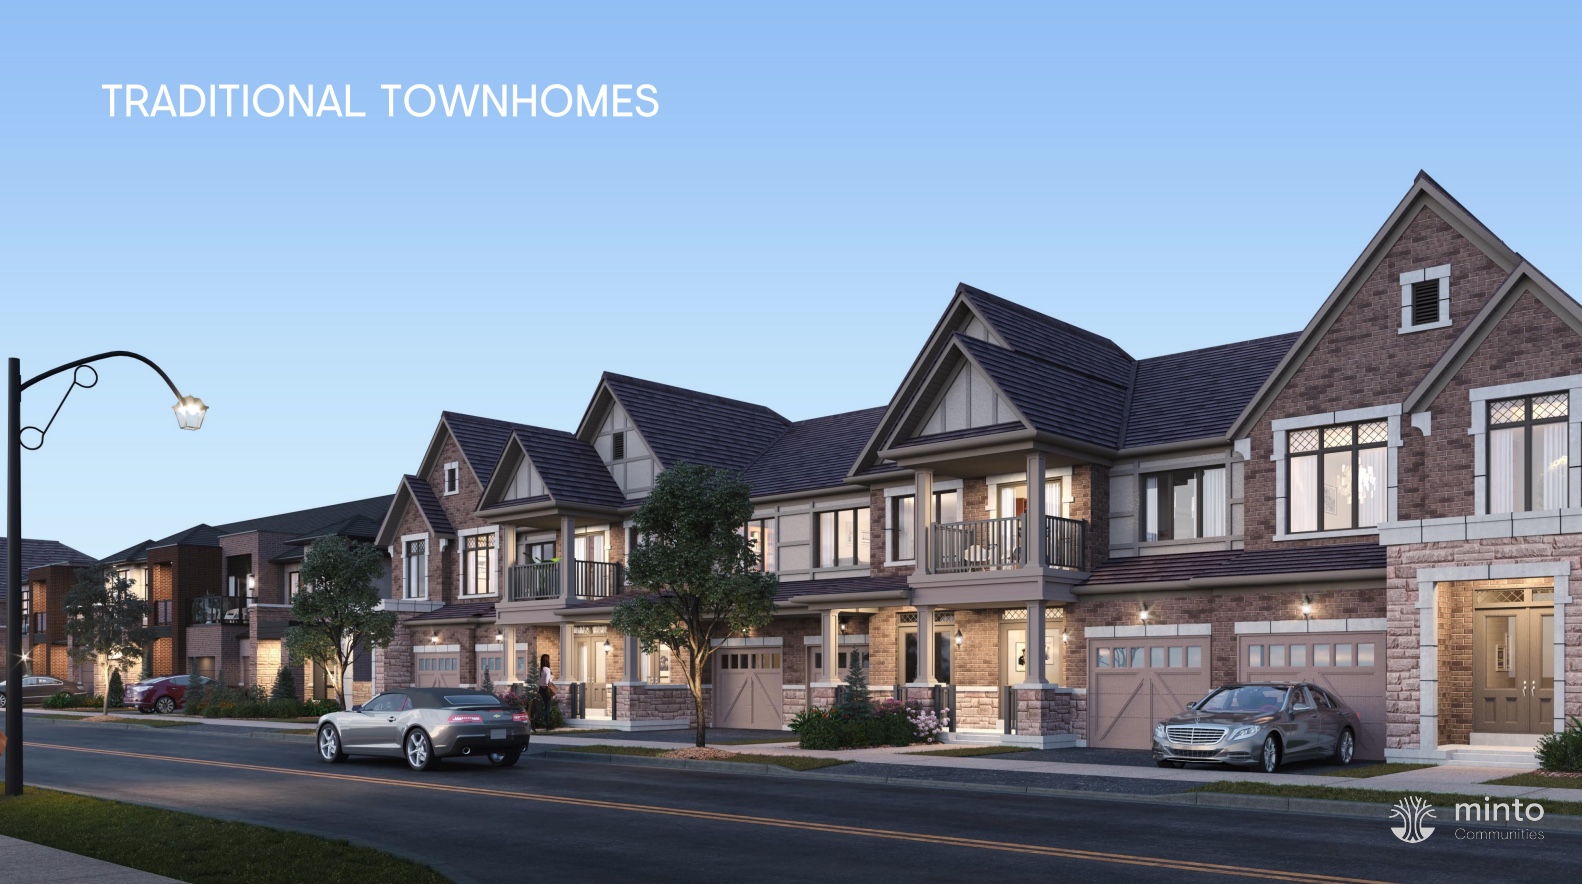 Union Village Traditional Townhomes Renderings True Condos